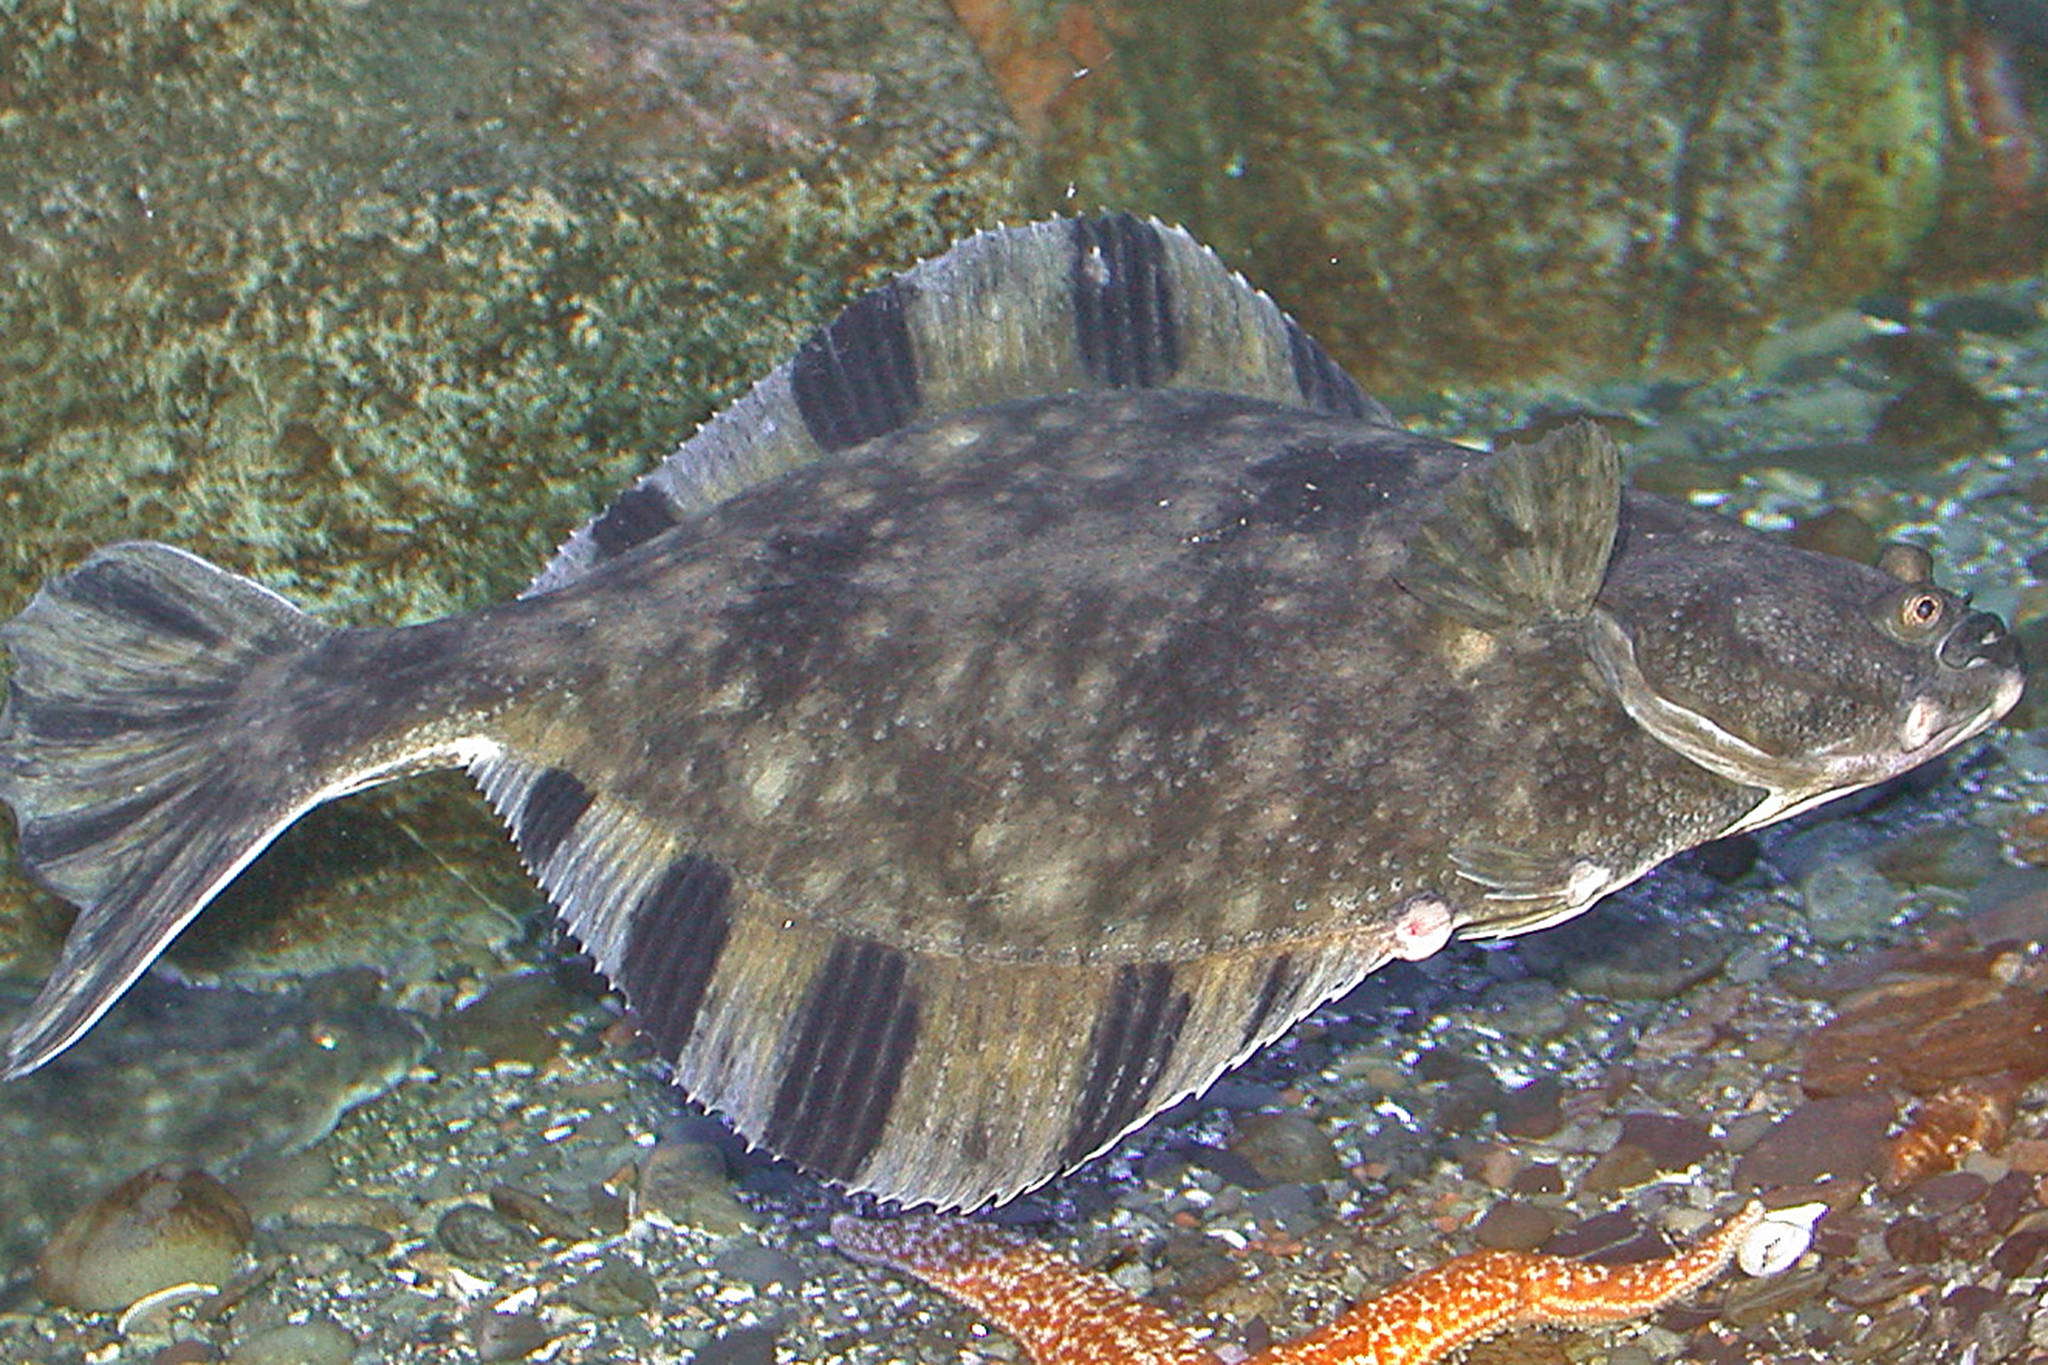 A starry flounder in the intertidal zone shows its distinctive black bars on dorsal and anal fins. (Courtesy Photo / Bob Armstrong)